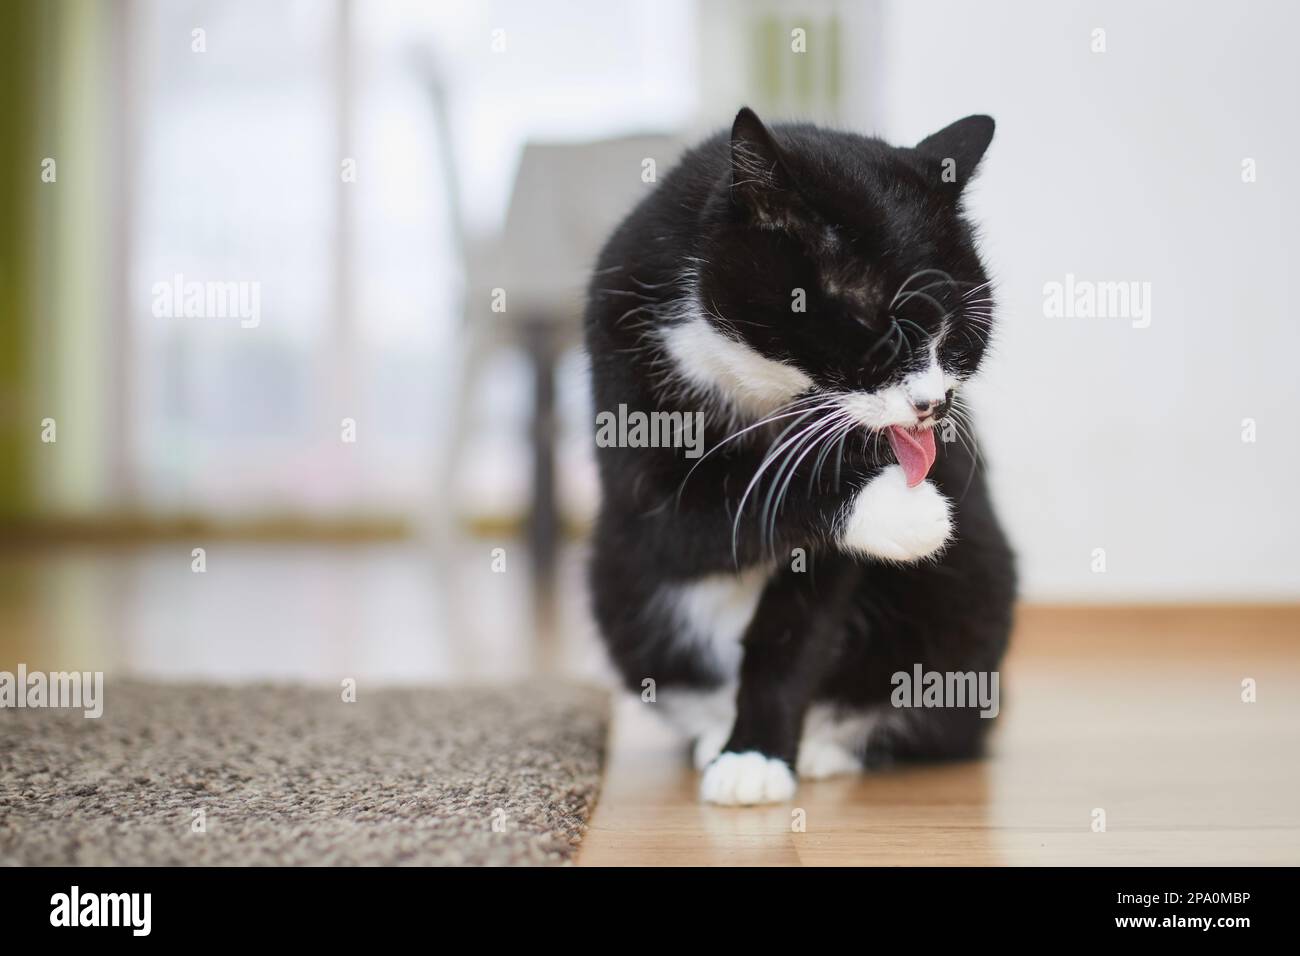 Domestic life with pet. Cute black cat is licking paw on floor at home. Stock Photo